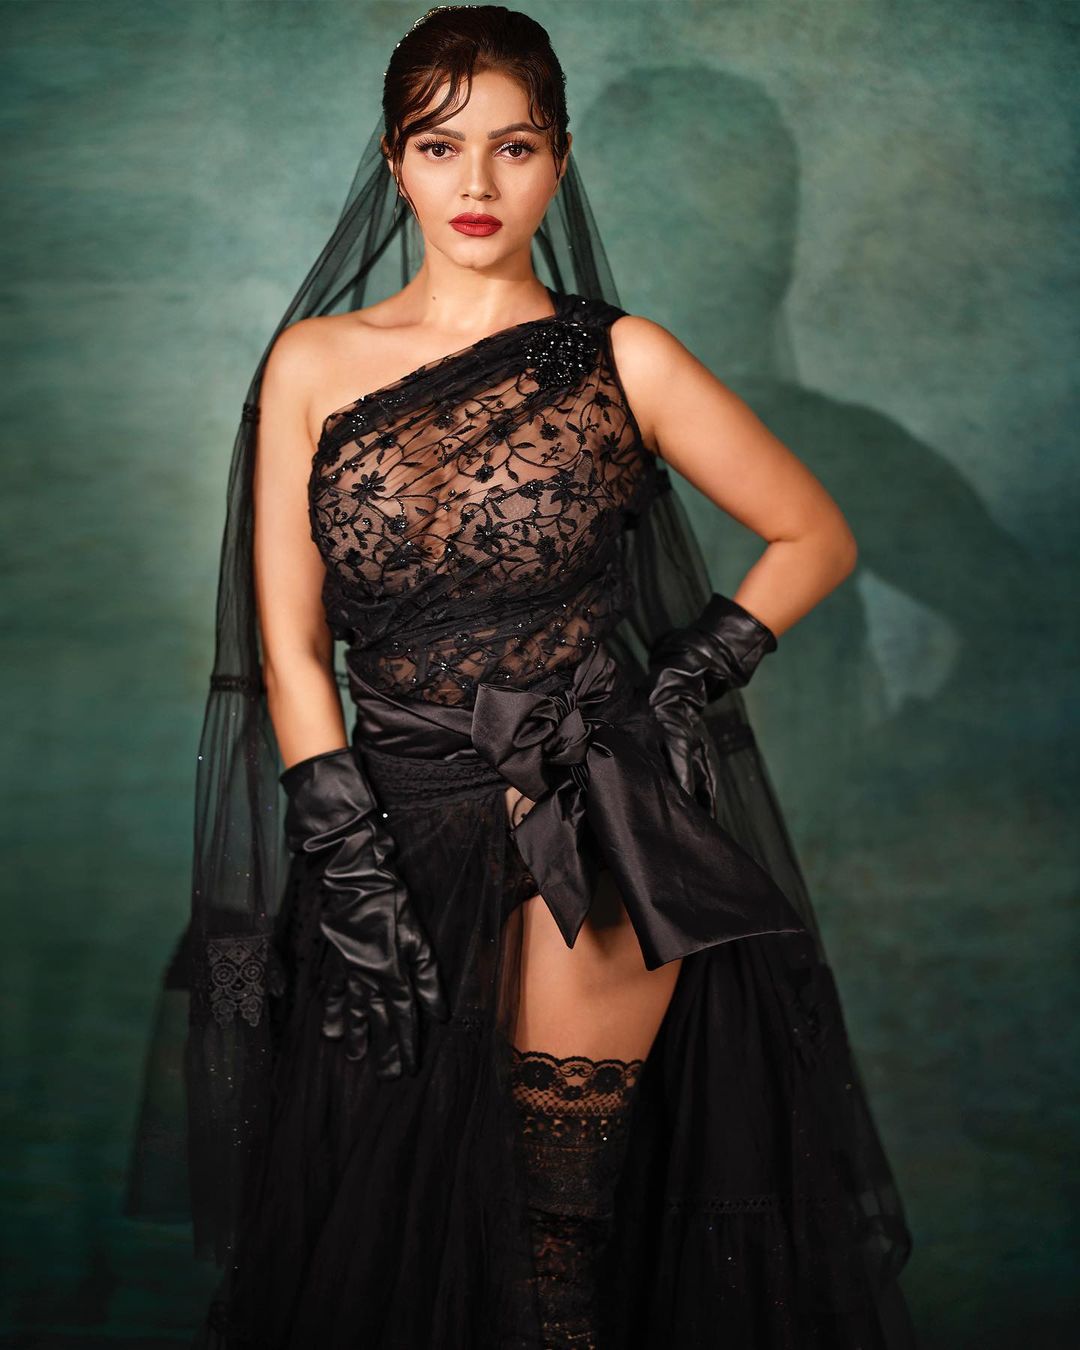 Rubina Dilaik is raising temperature in an all-black look in her recent photoshoot